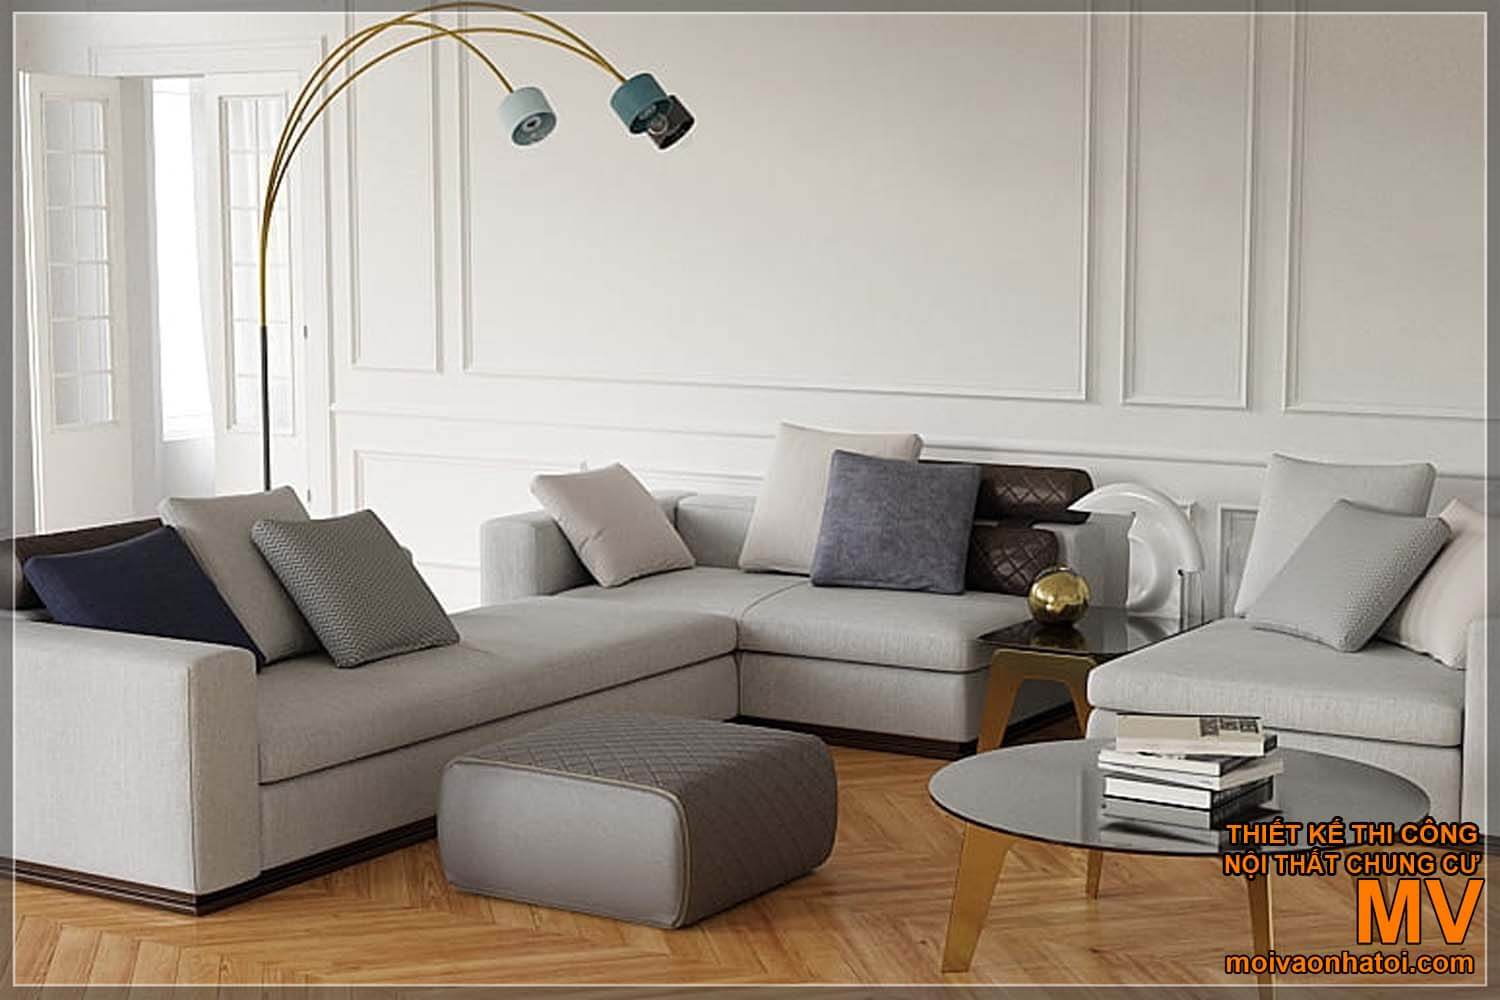 simple, modern sofa models for neoclassical houses